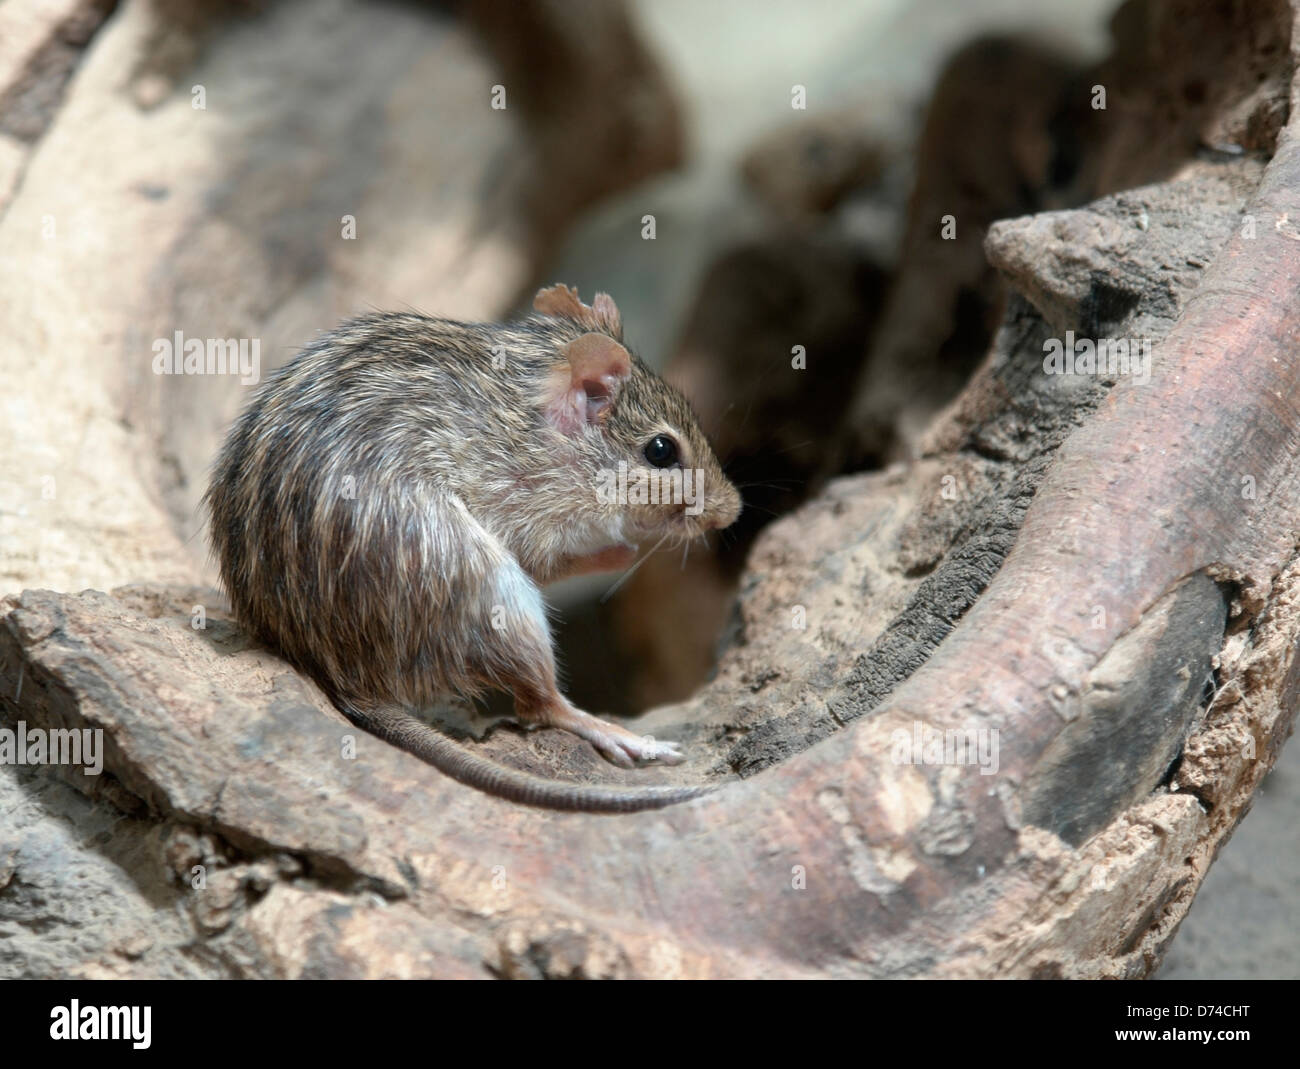 striped grass mouse in a knothole Stock Photo